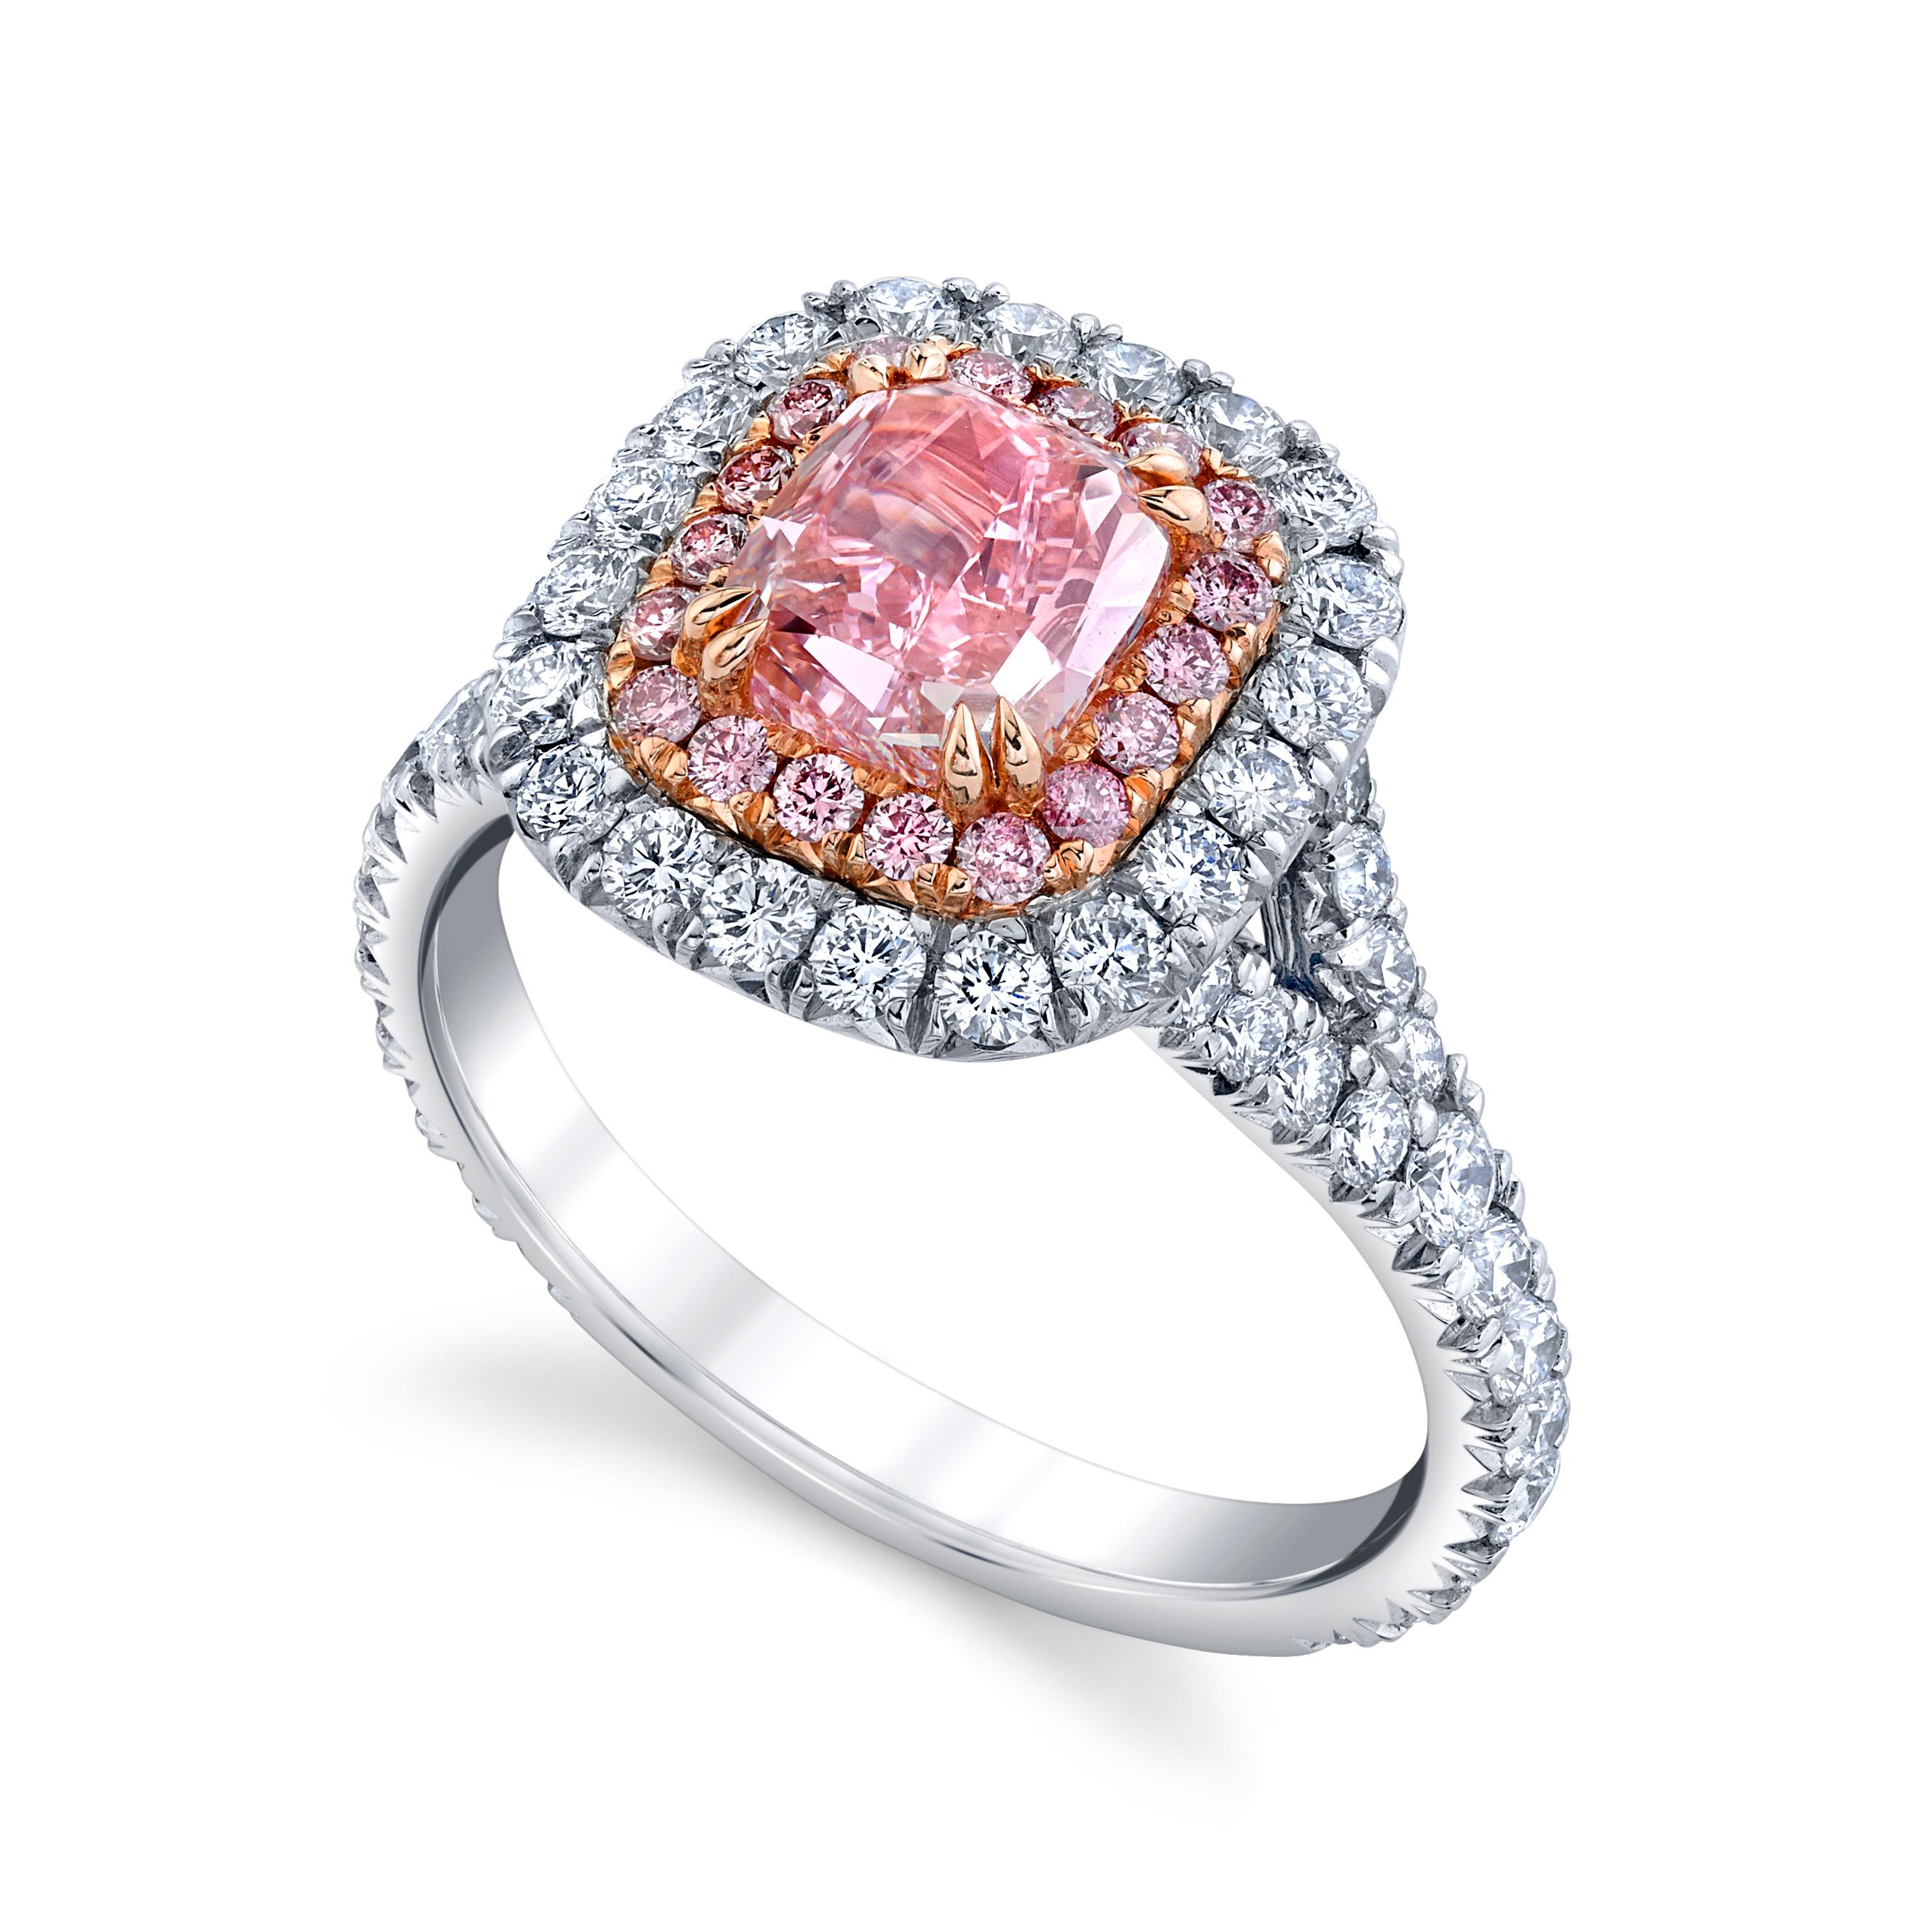 The ultimate family heirloom to invest in is Natural Pink Diamonds.

A glamorous 1.40ct Cushion Cut Fancy Intense Purplish Pink, Internally Flawless Natural Diamond set in Platinum & 18K Rose Gold surround by stunning Pink and Colorless Natural